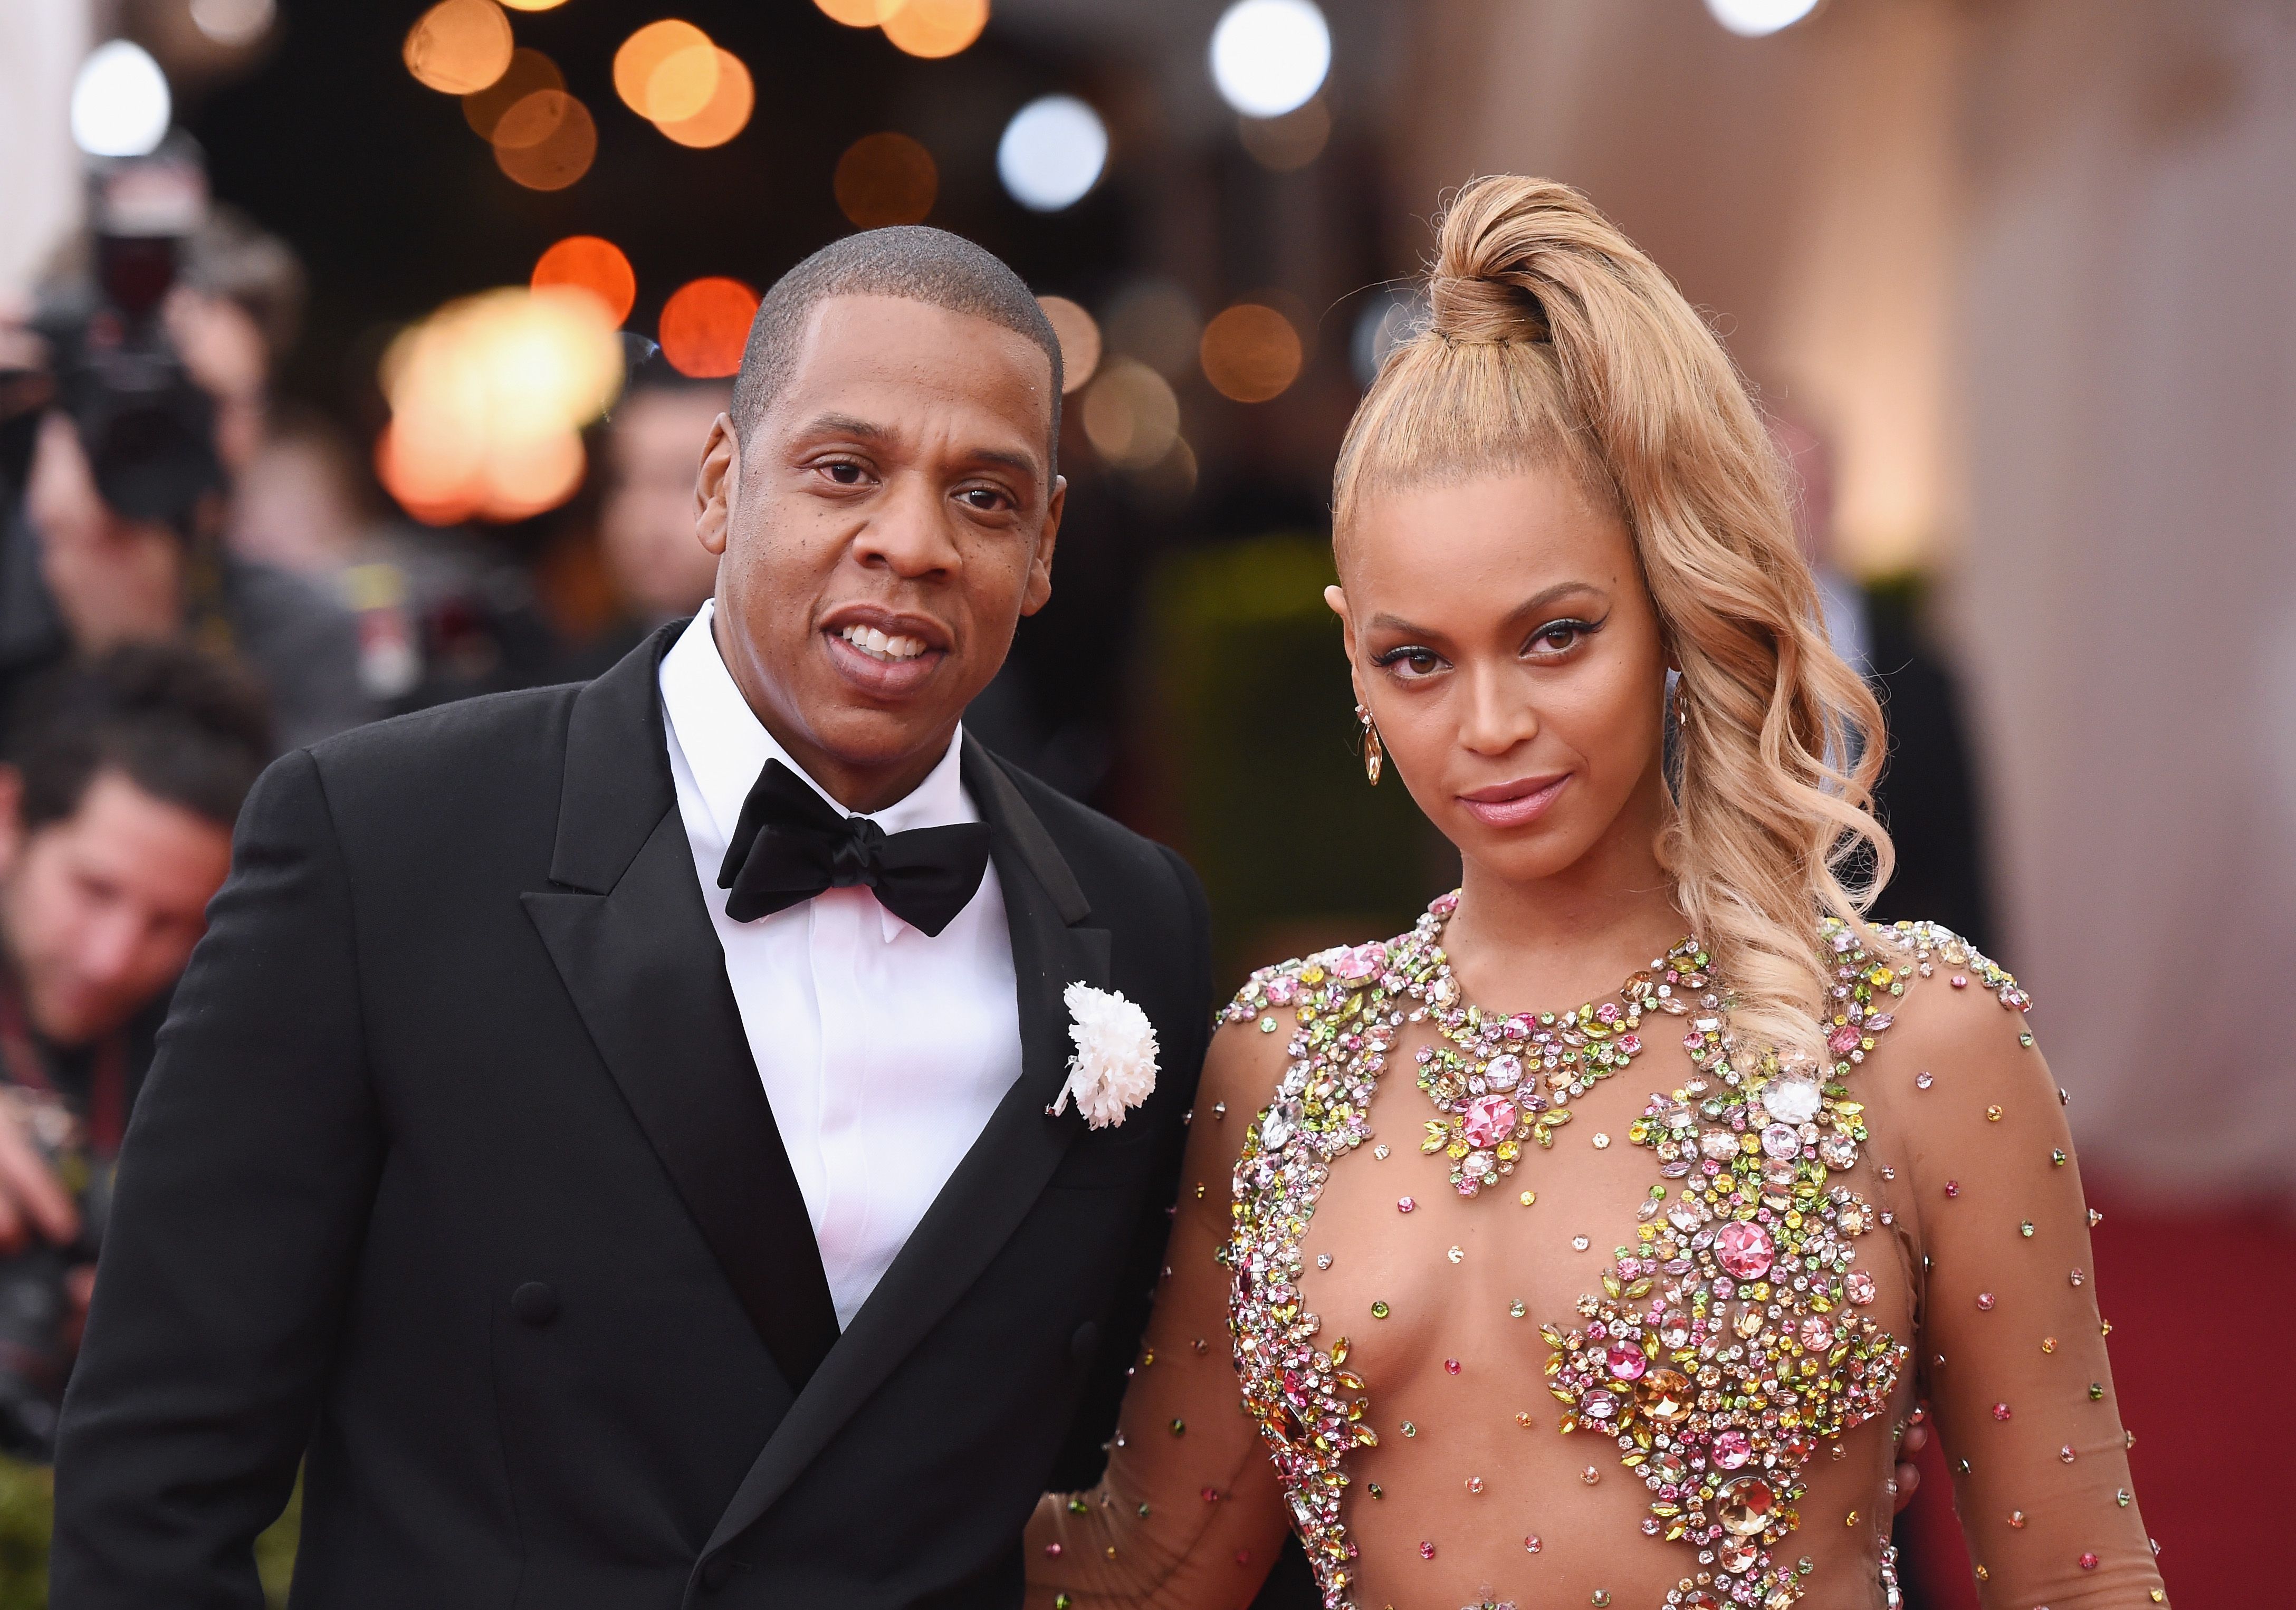 JAY-Z, Biography, Songs, Empire State of Mind, Beyonce, & Facts